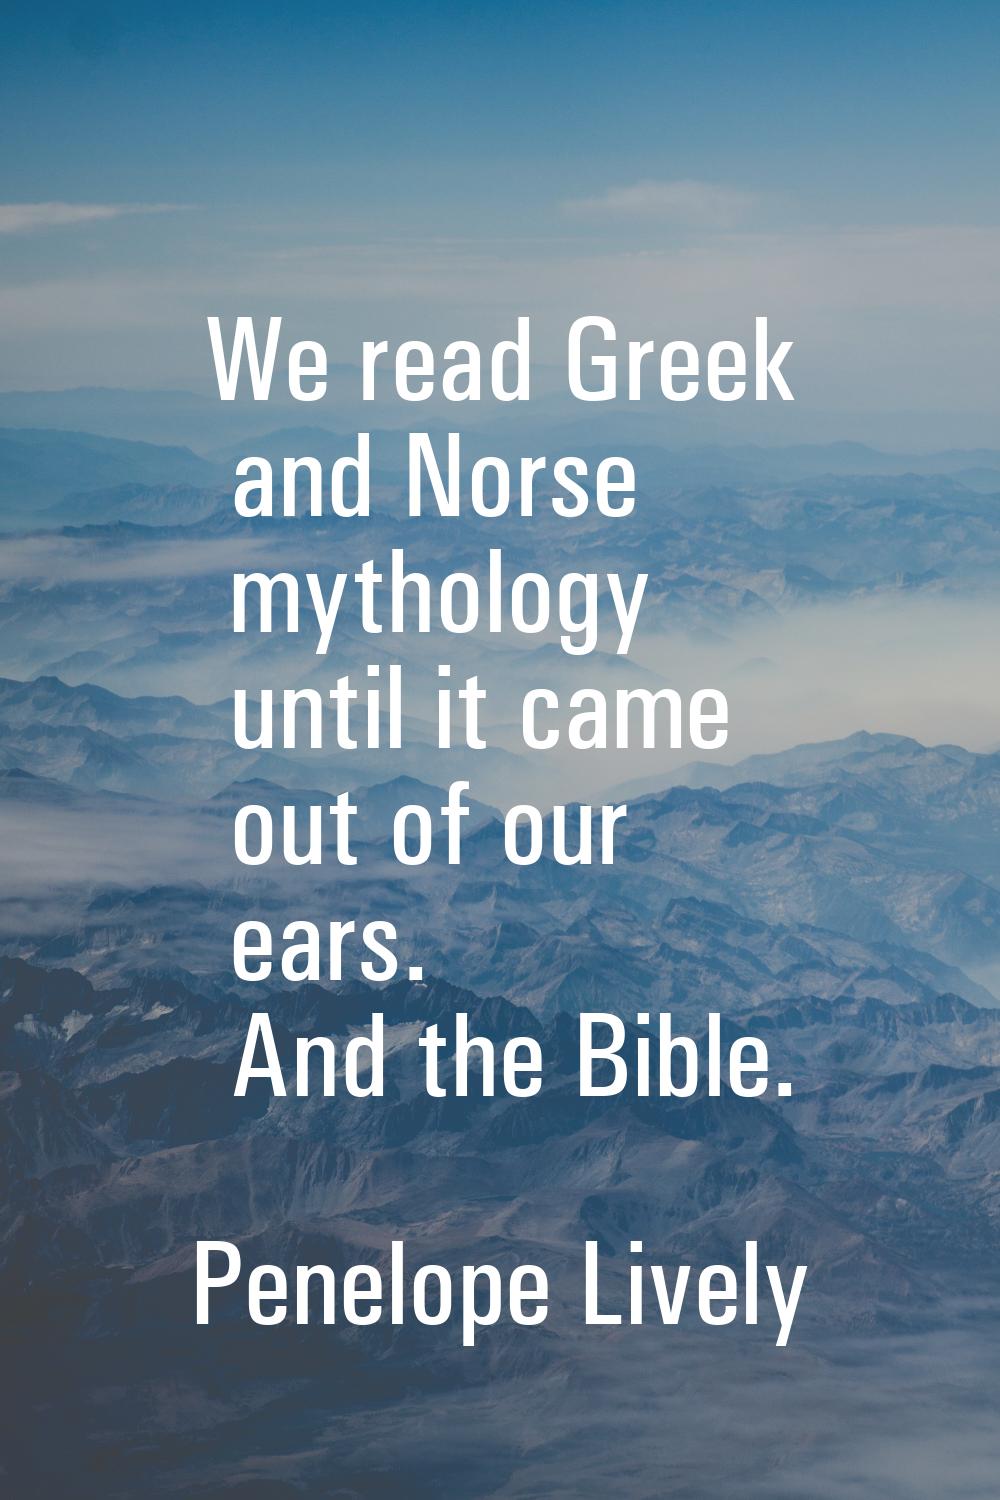 We read Greek and Norse mythology until it came out of our ears. And the Bible.